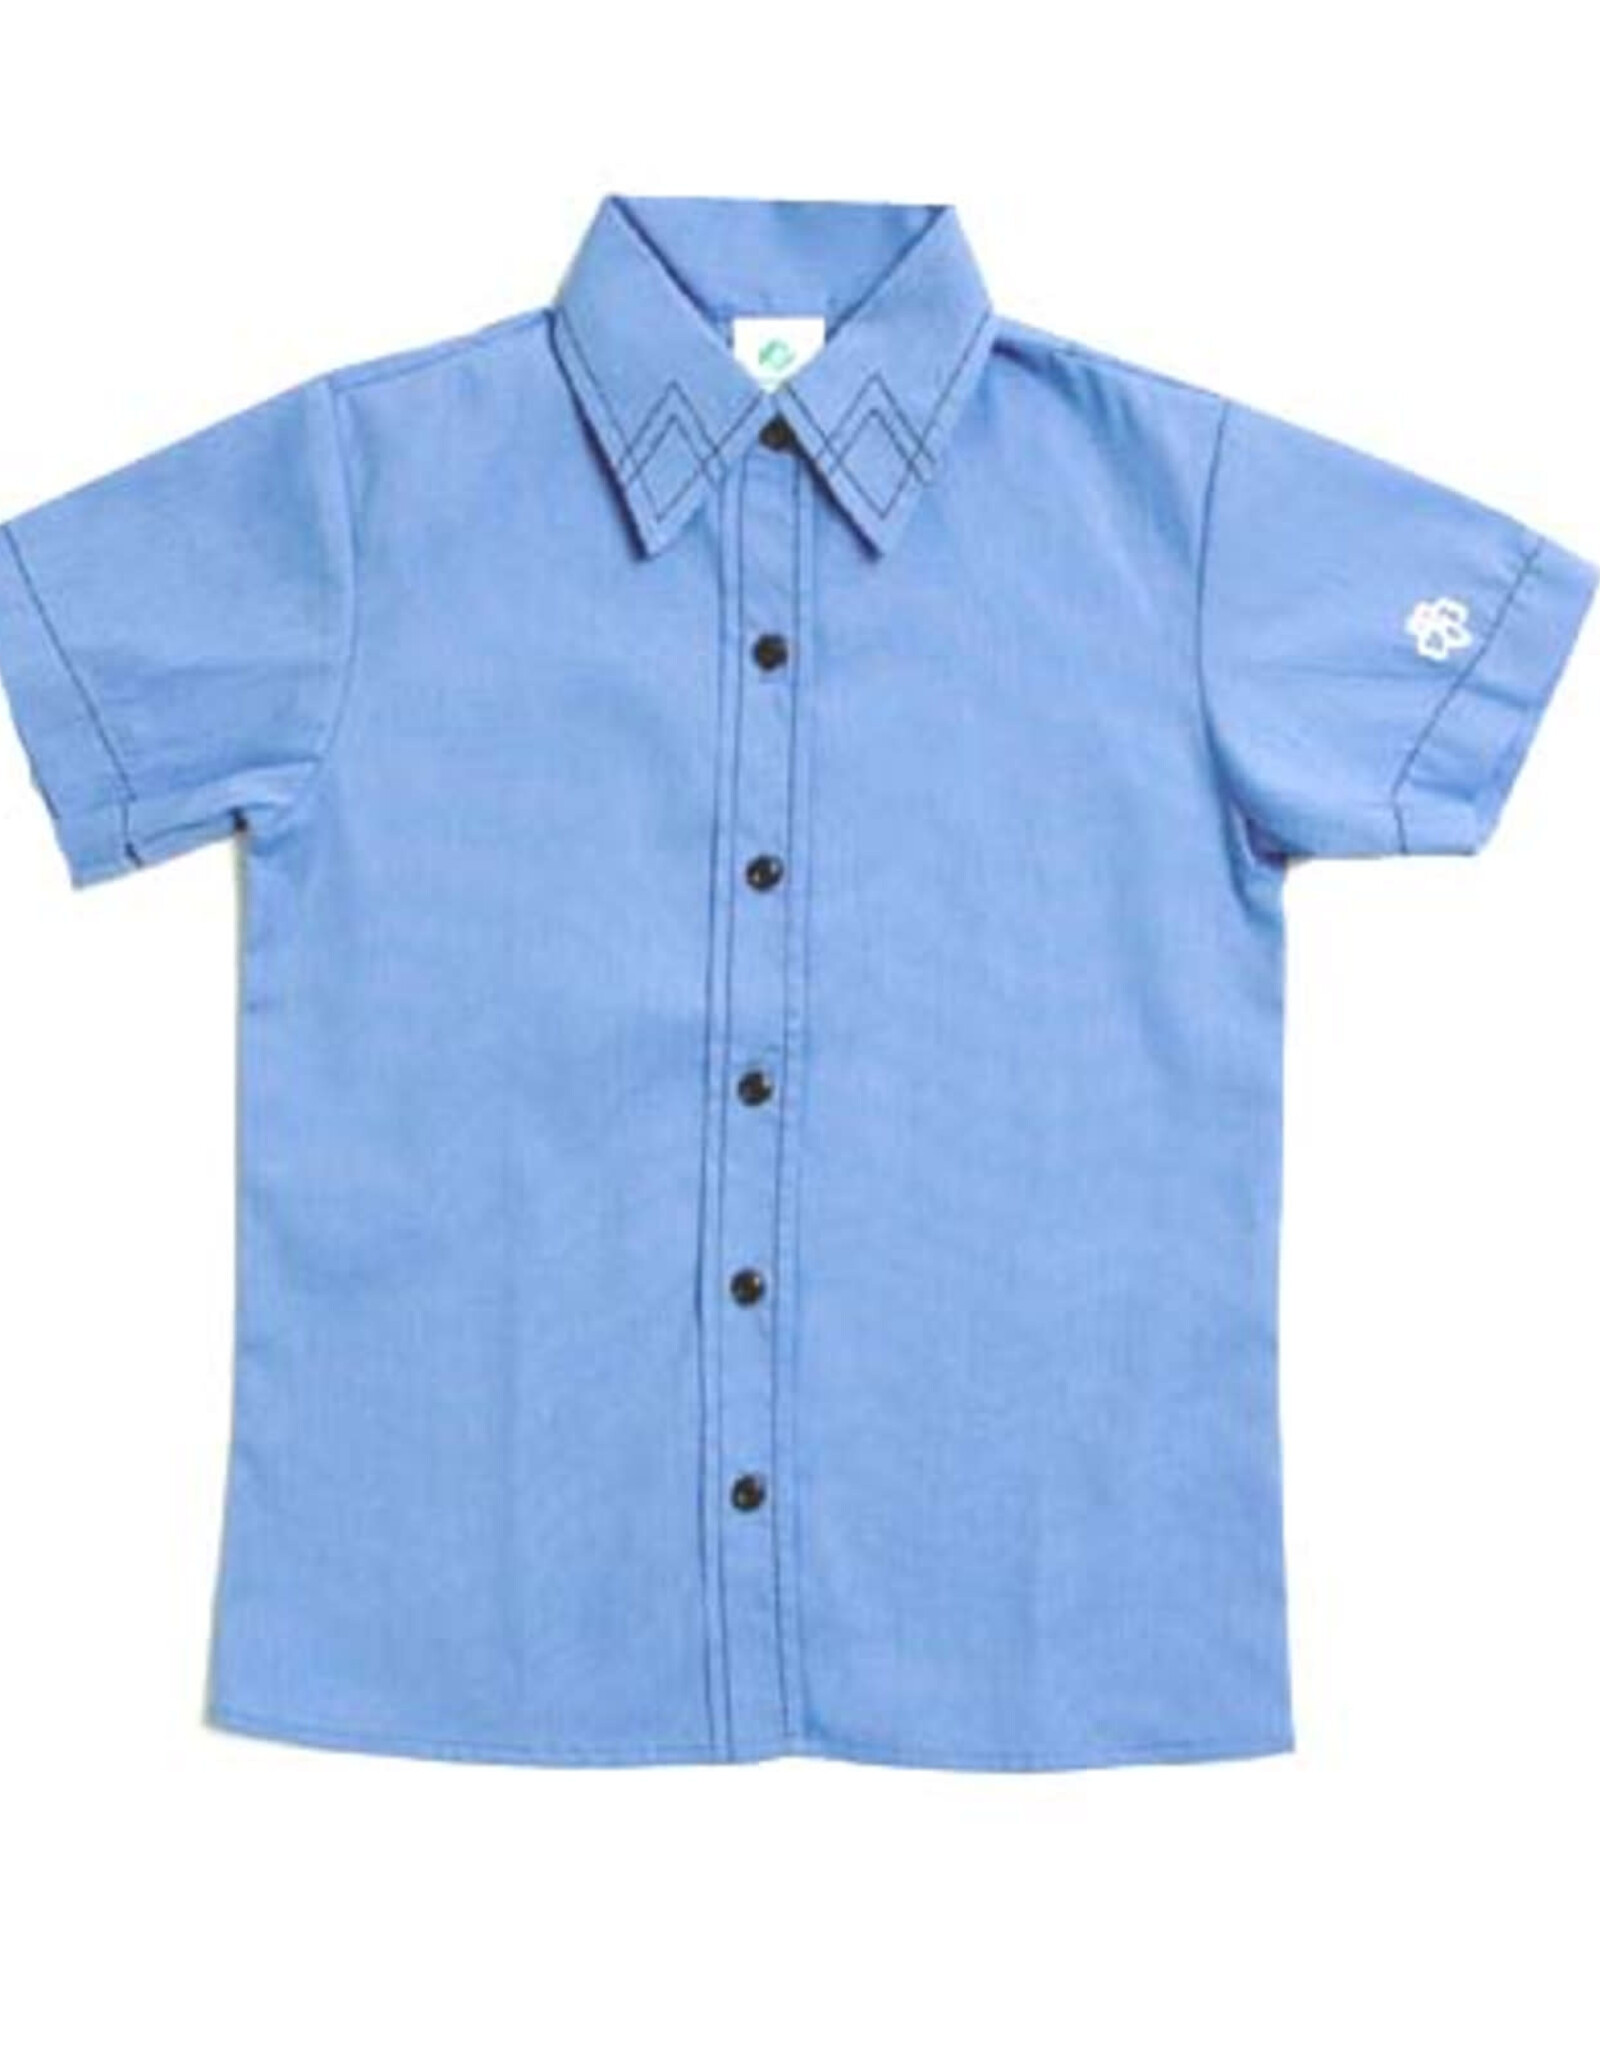 GIRL SCOUTS OF THE USA ! Brownie S/S Shirt - Blue